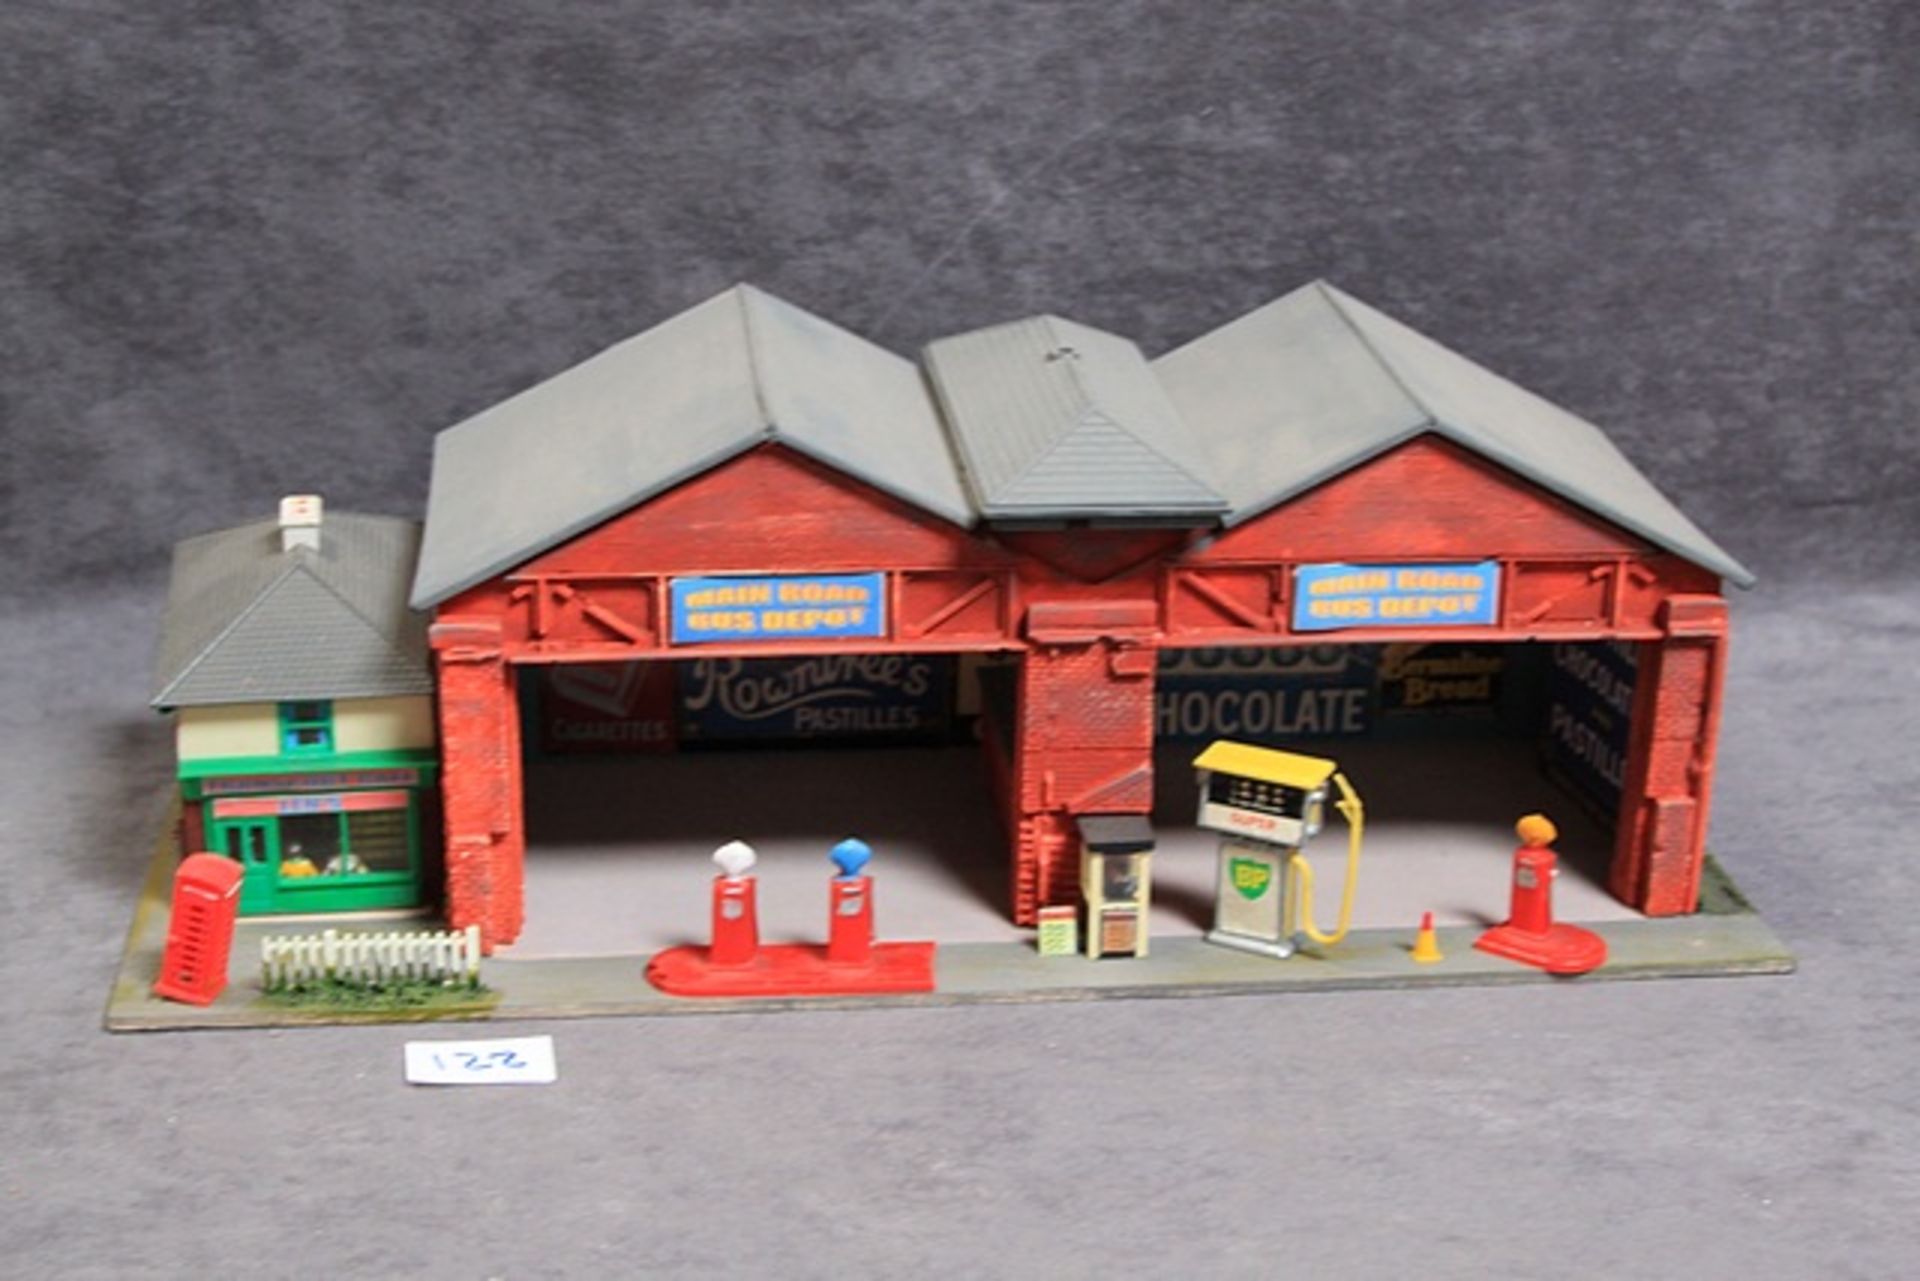 Wood Constructed Model Of Main Road Bus Depot With Petrol Pumps, Figures Forecourt And Transport